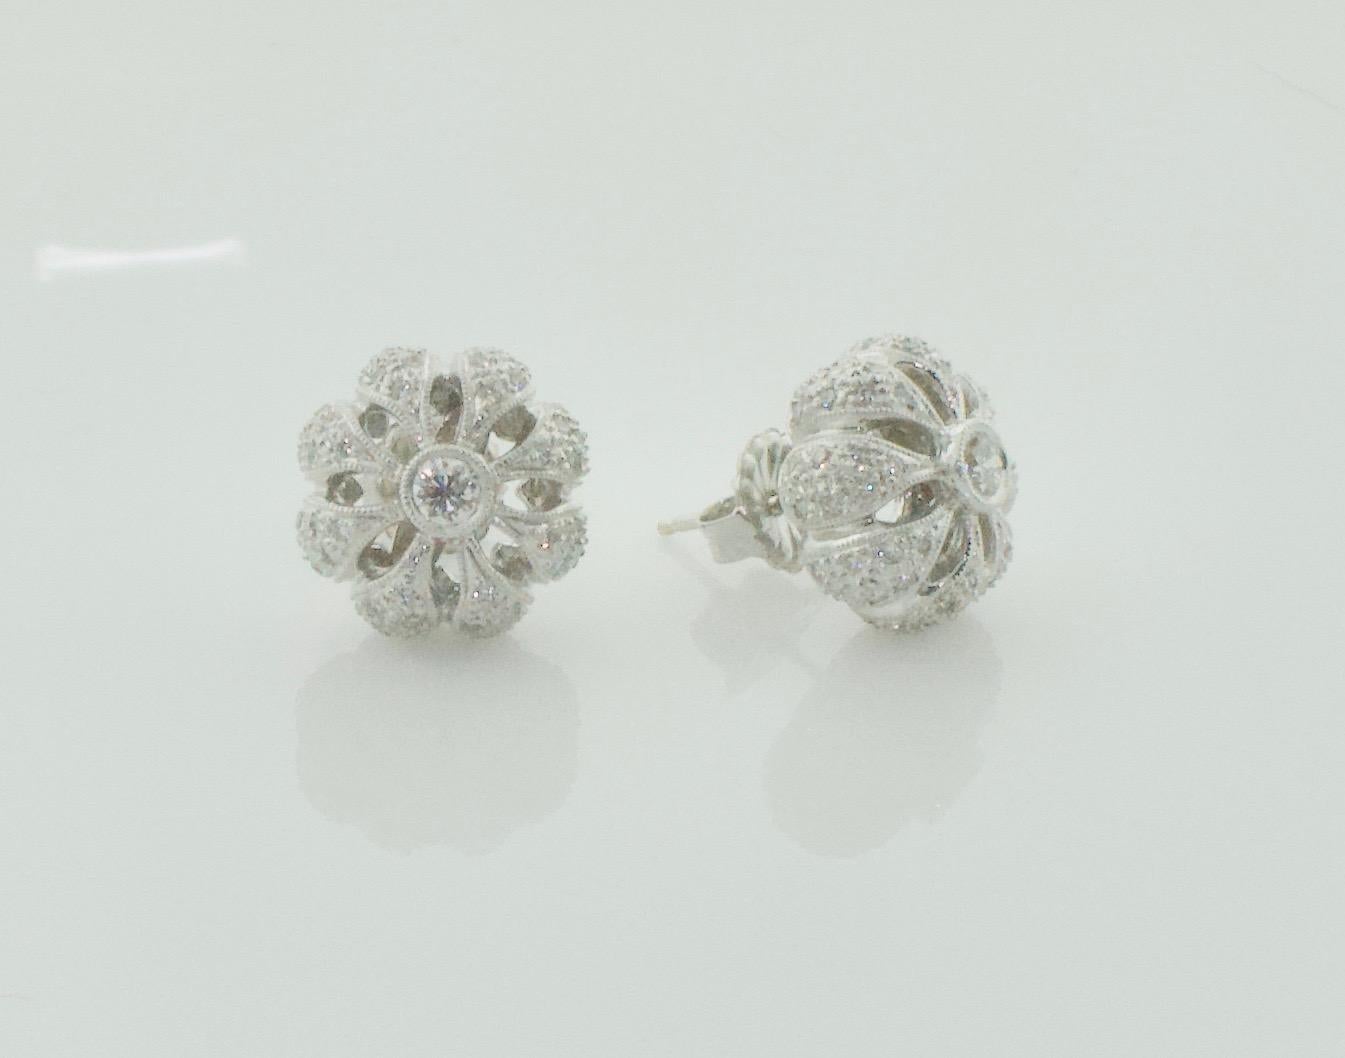 Diamond Floral Earrings in 18k White Gold 1.25 Carats Total In Excellent Condition For Sale In Wailea, HI